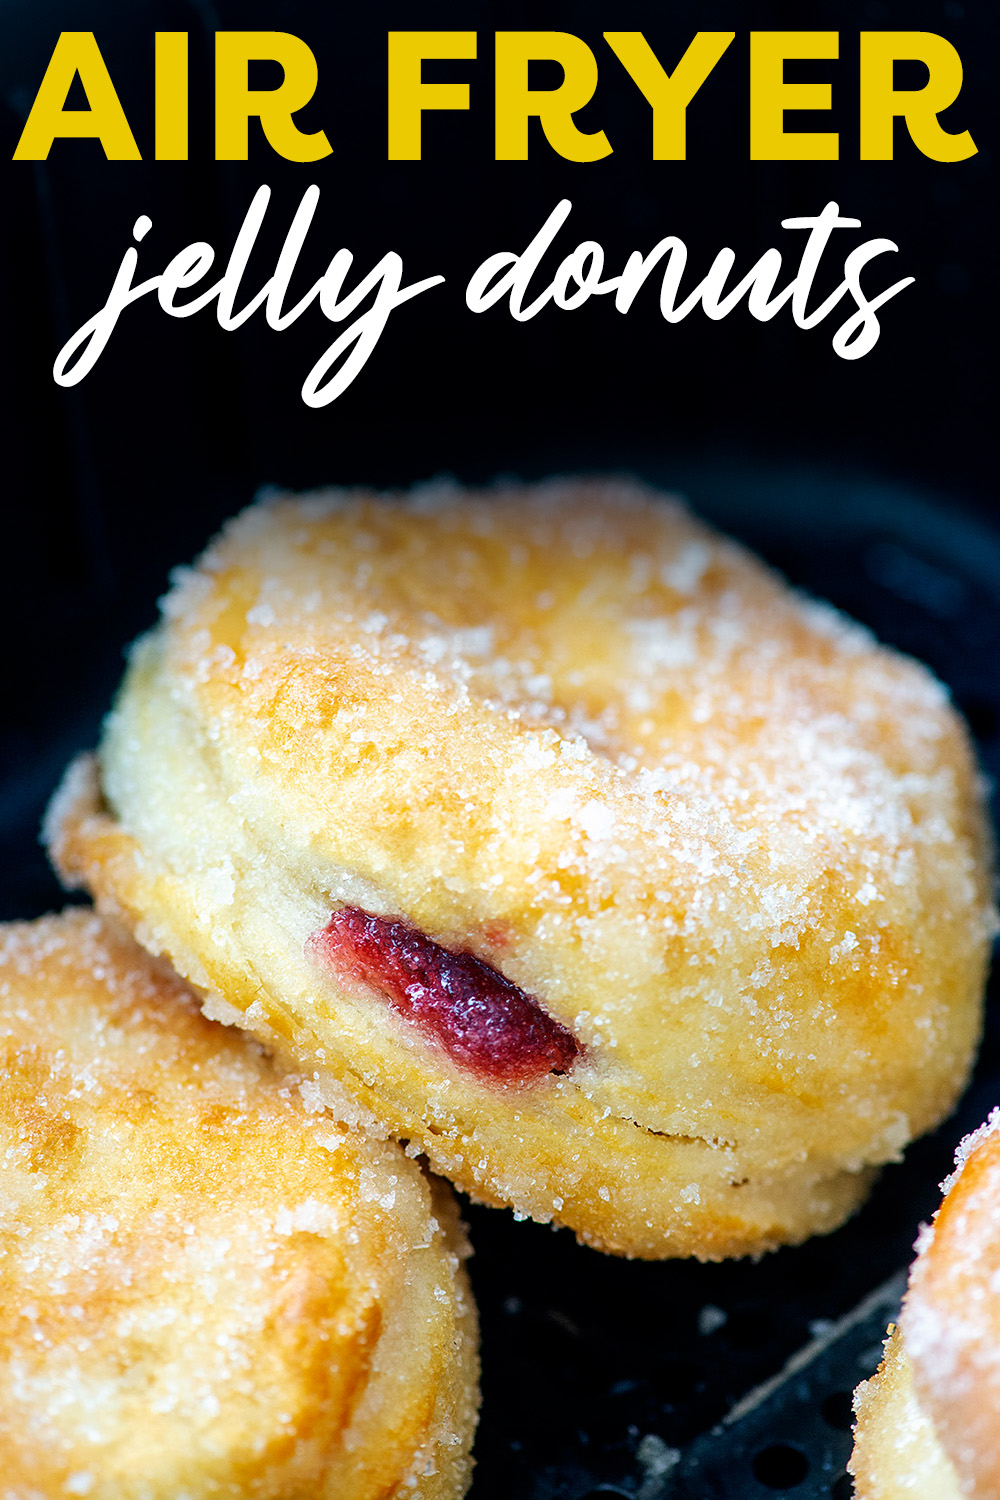 These homemade air fryer jelly donuts are super simple to make!  The air fried biscuit base is amazing and the warm jelly center goes perfect with this donut!